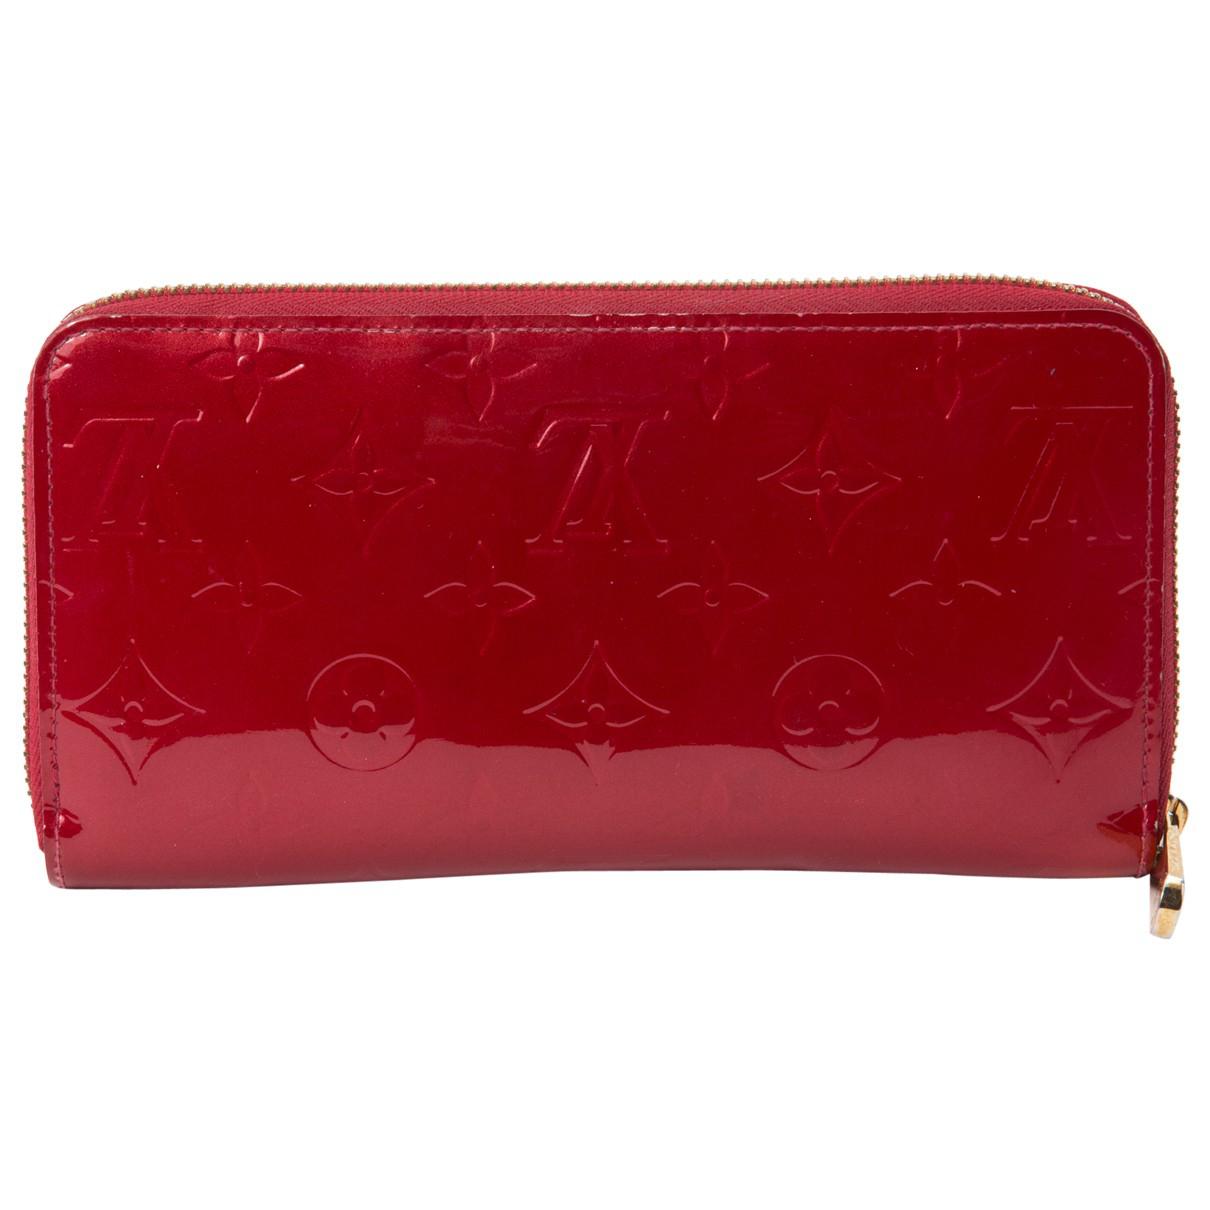 Louis Vuitton Zippy Wallet Red | Confederated Tribes of the Umatilla Indian Reservation